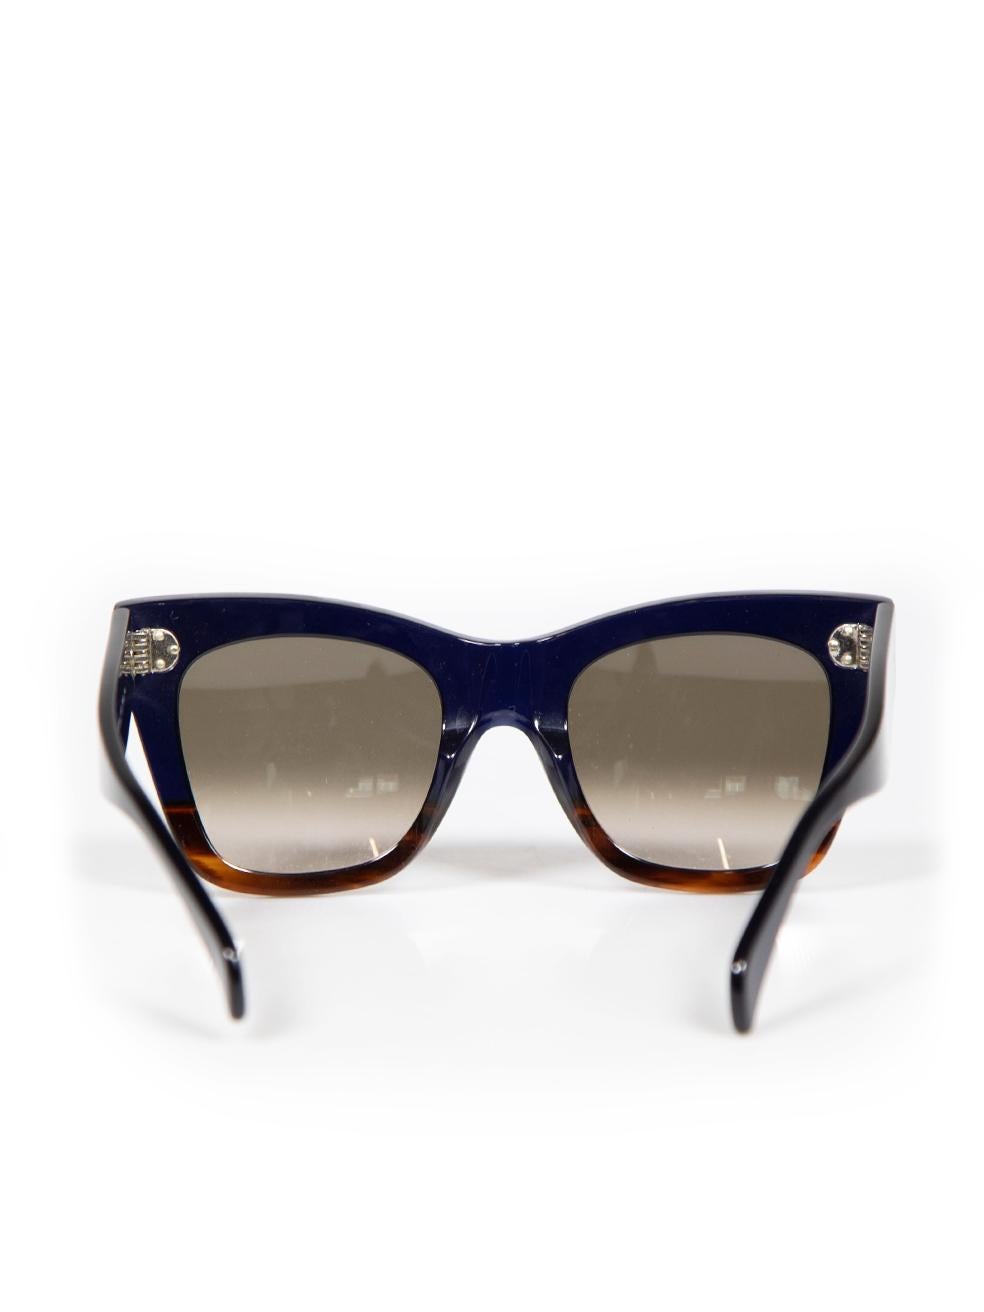 Céline Blue Marta Oversized Cat Eye Sunglasses In Excellent Condition For Sale In London, GB